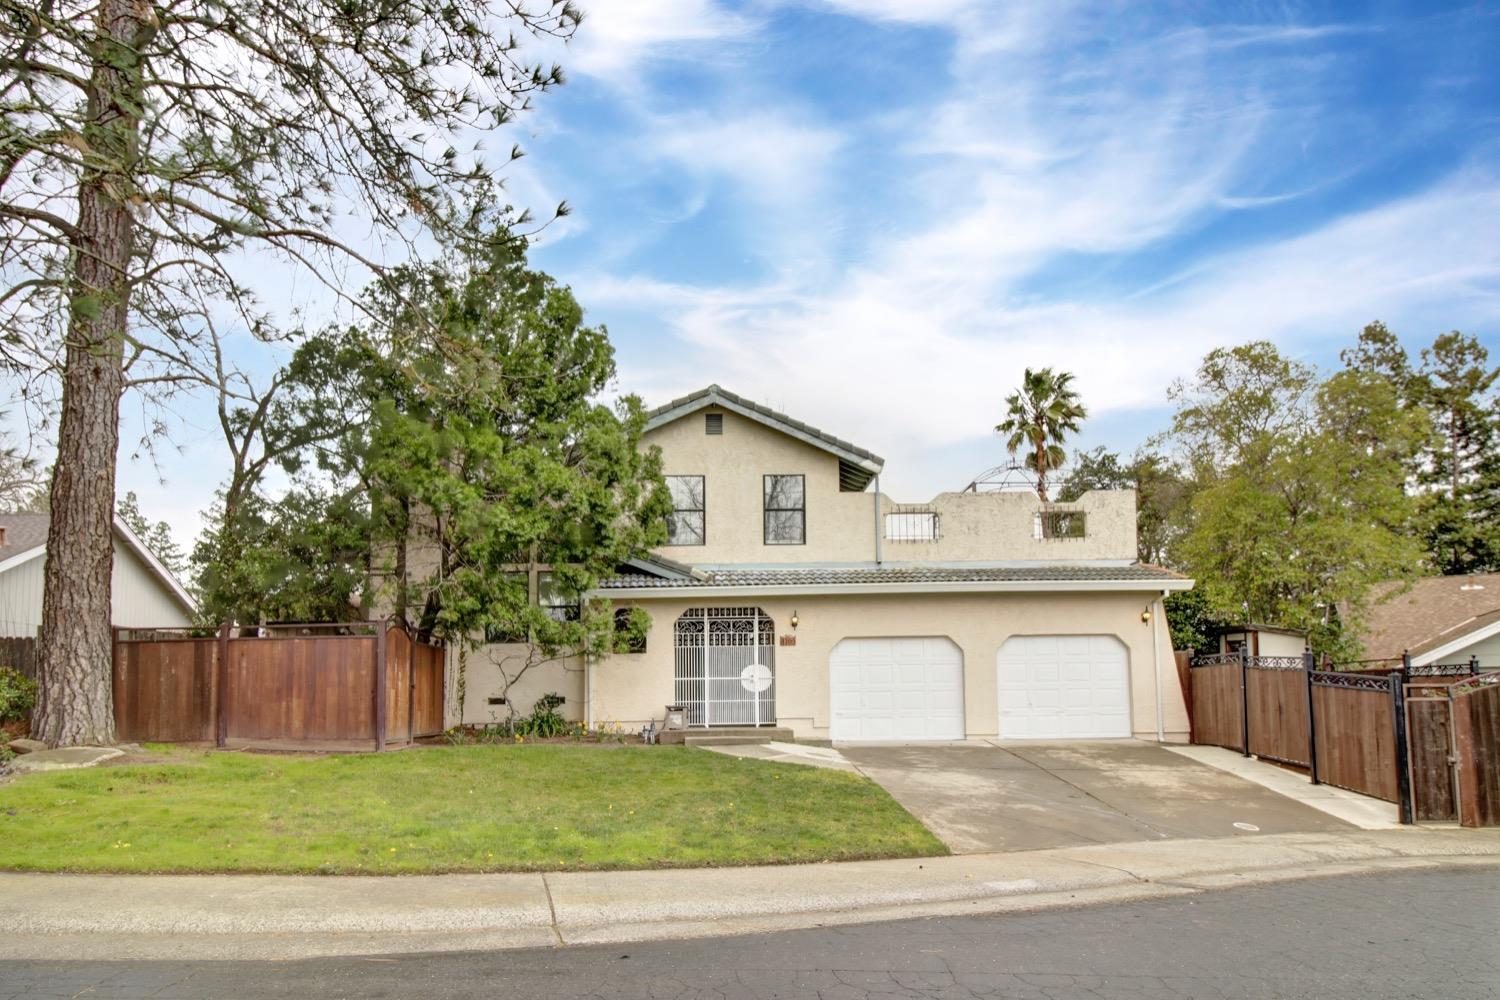 Welcome to this beautifully updated try-level home in the heart of Orangevale. All of the updates an